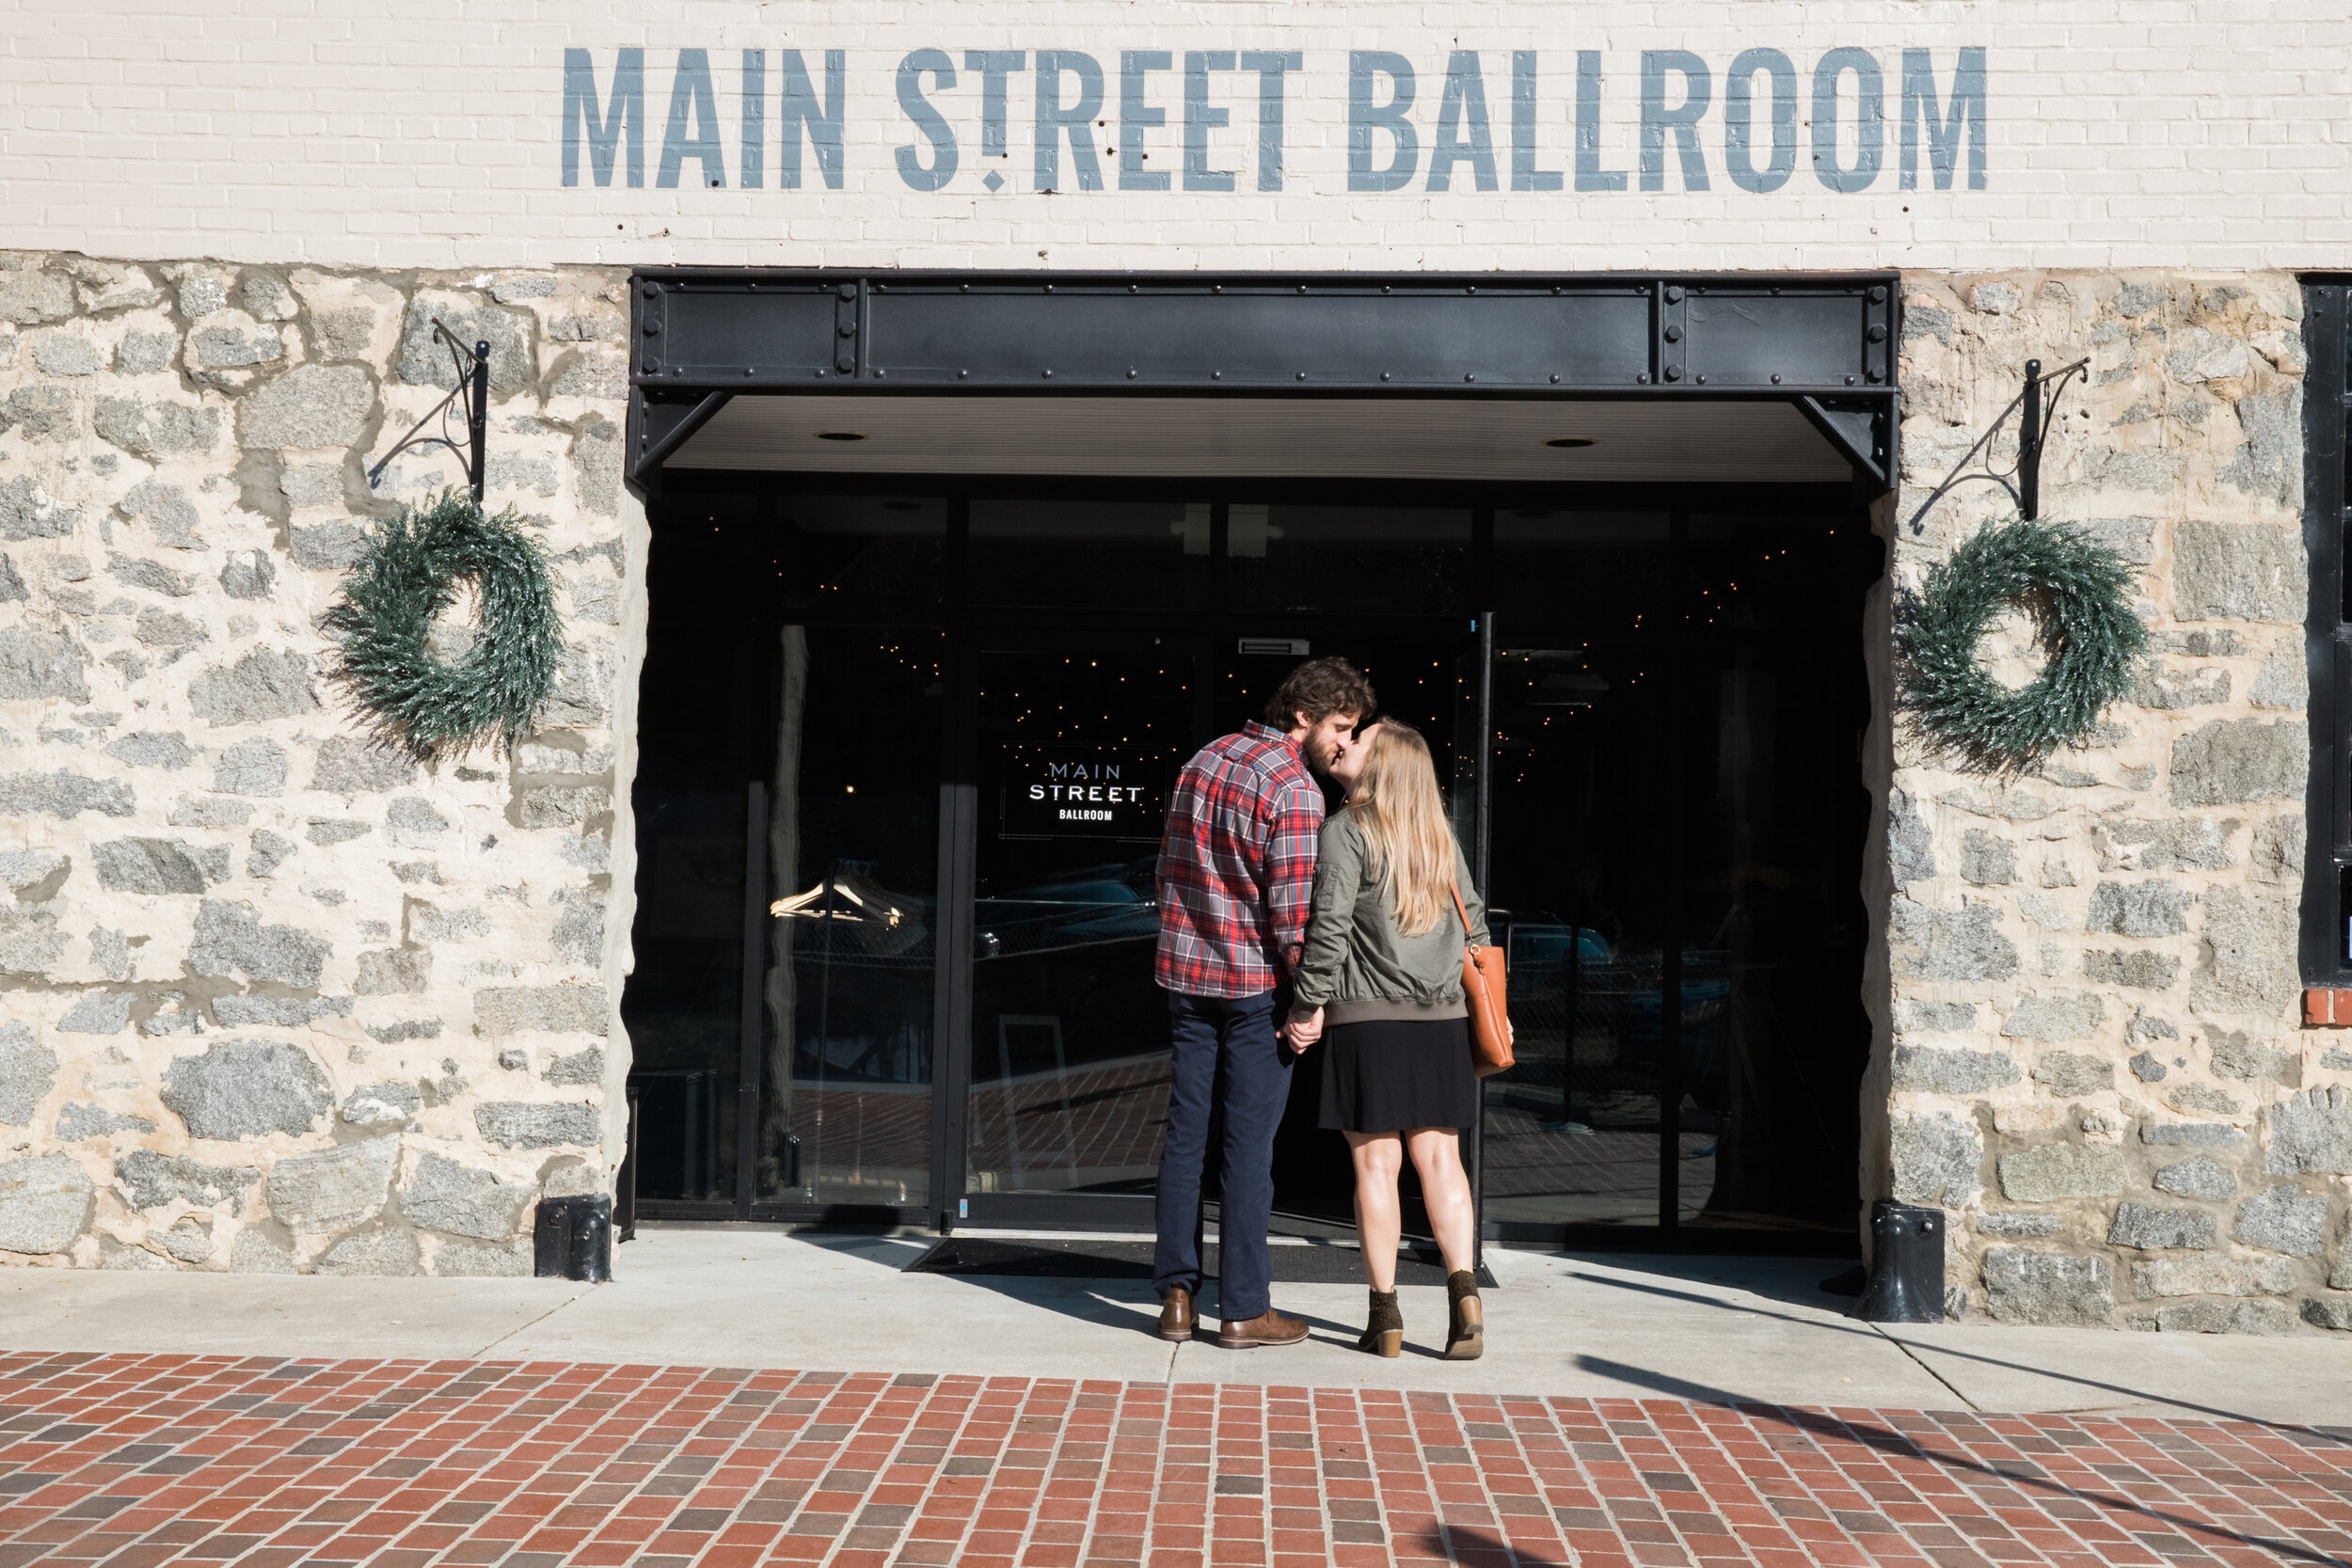 Custom Hand Lettered Signs for Engagement Photos by Signs of Our Lives shot by Megapixels Media Photography Best Baltimore Wedding Photographers Main Street Ballroom-13.jpg